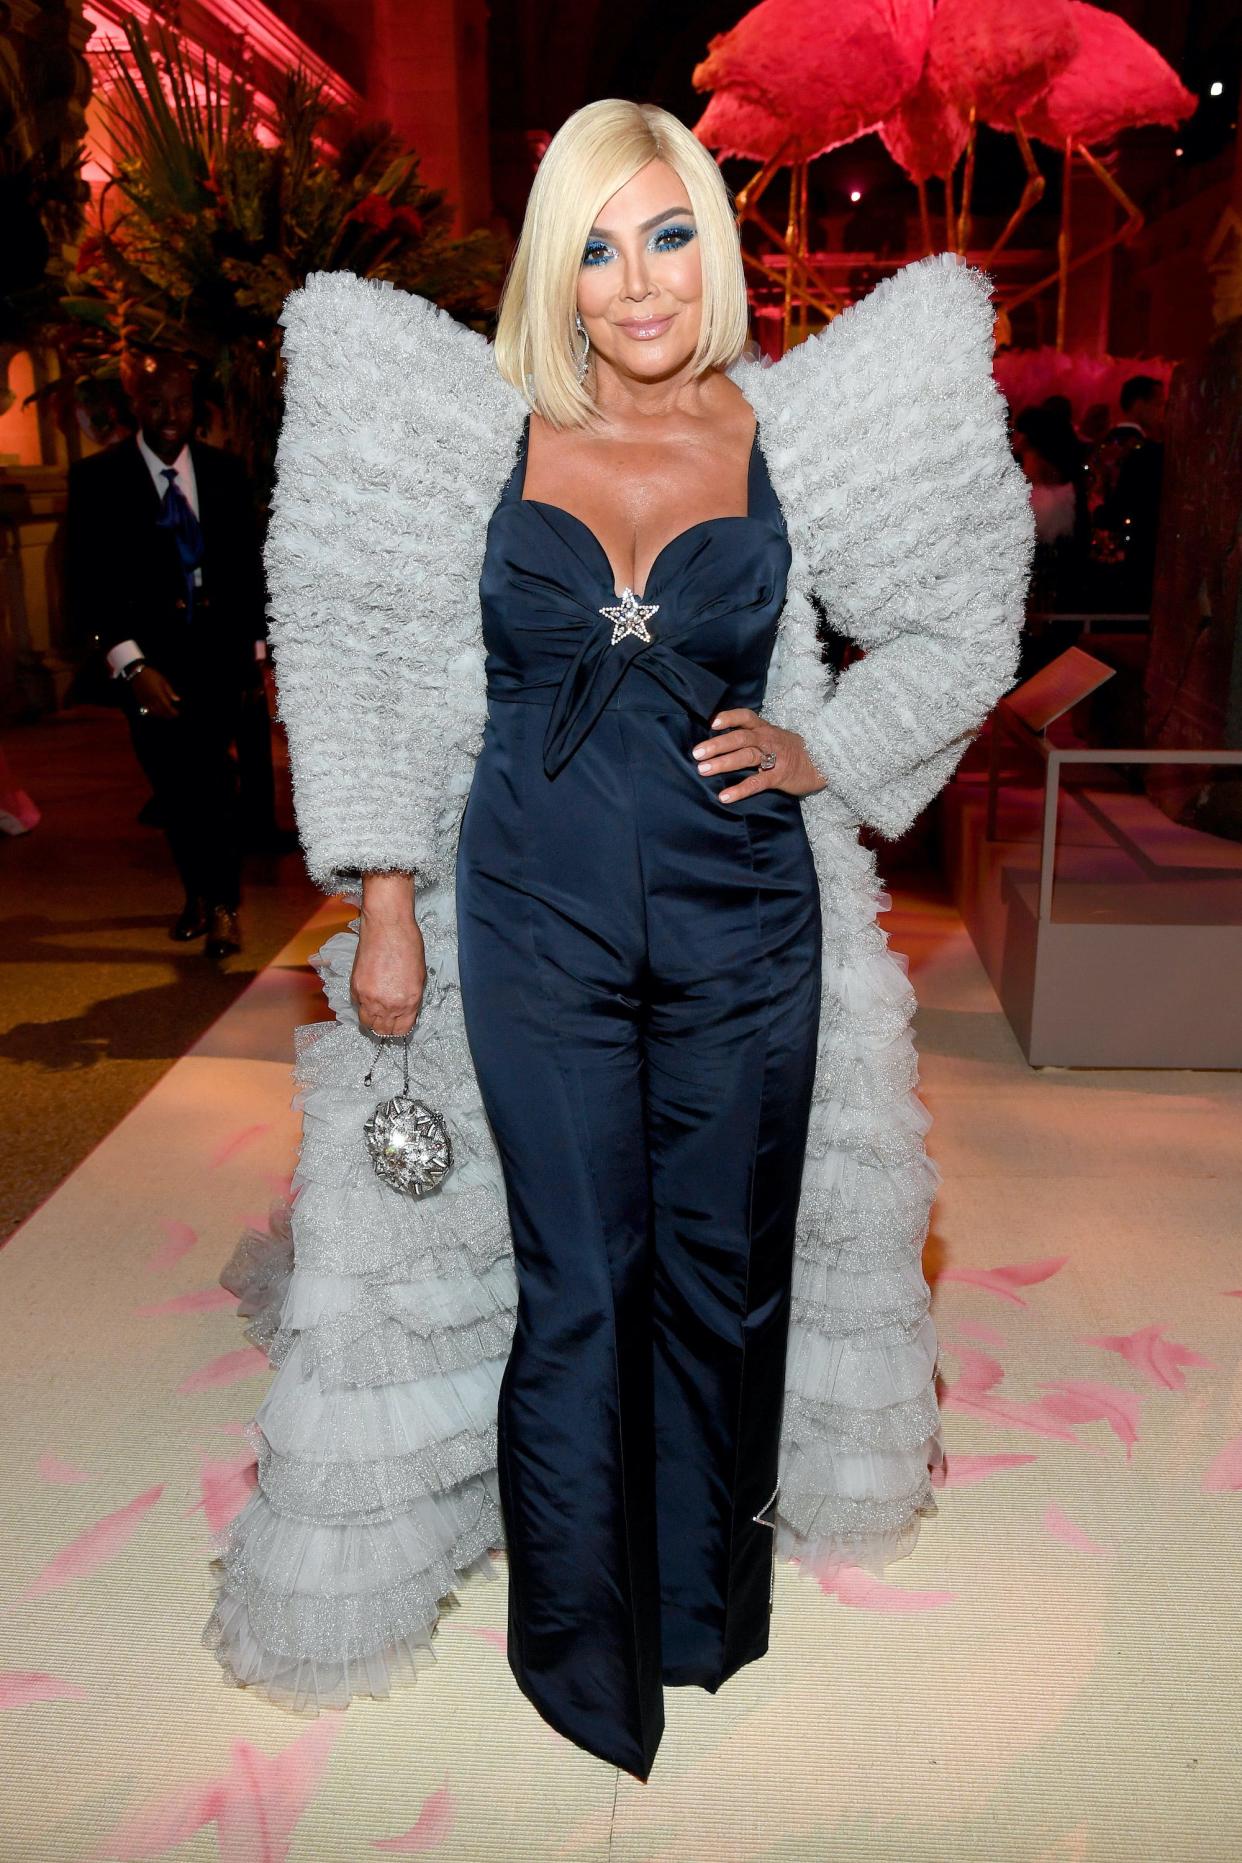 Kris Jenner attended the 2019 Met Gala in a blue jumpsuit with exaggerated shoulders and a silver star at her cleavage. Her hair is blonde and shoulder length.